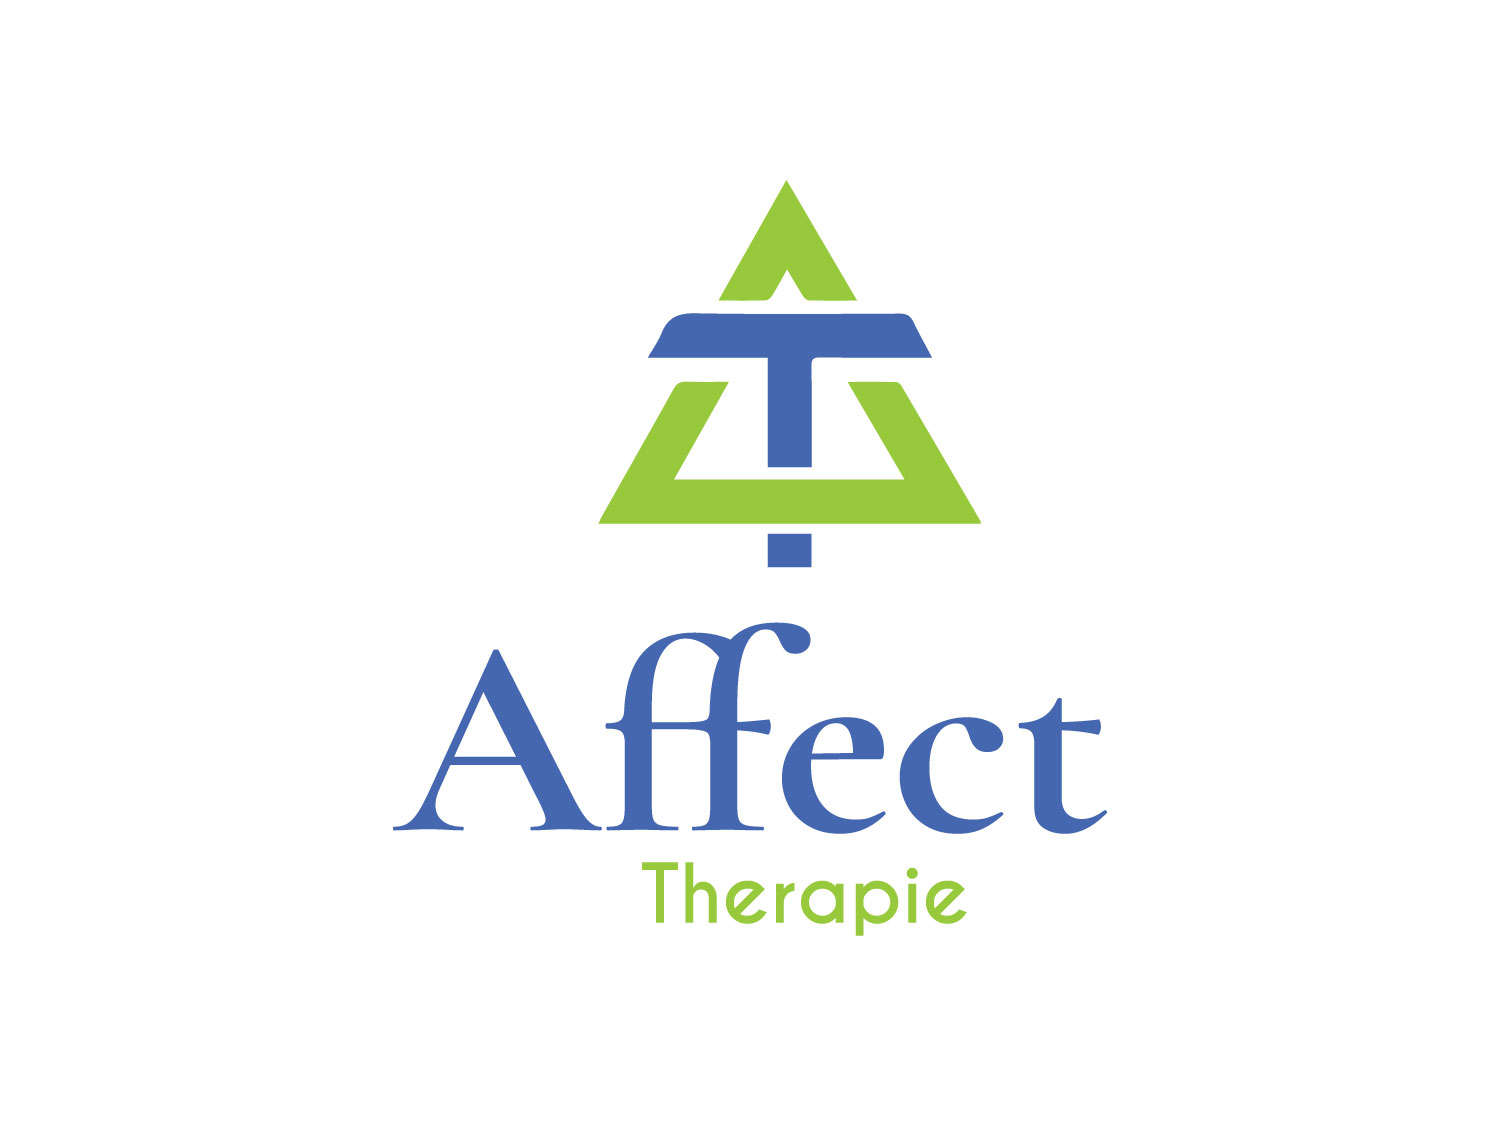 Affect Therapie